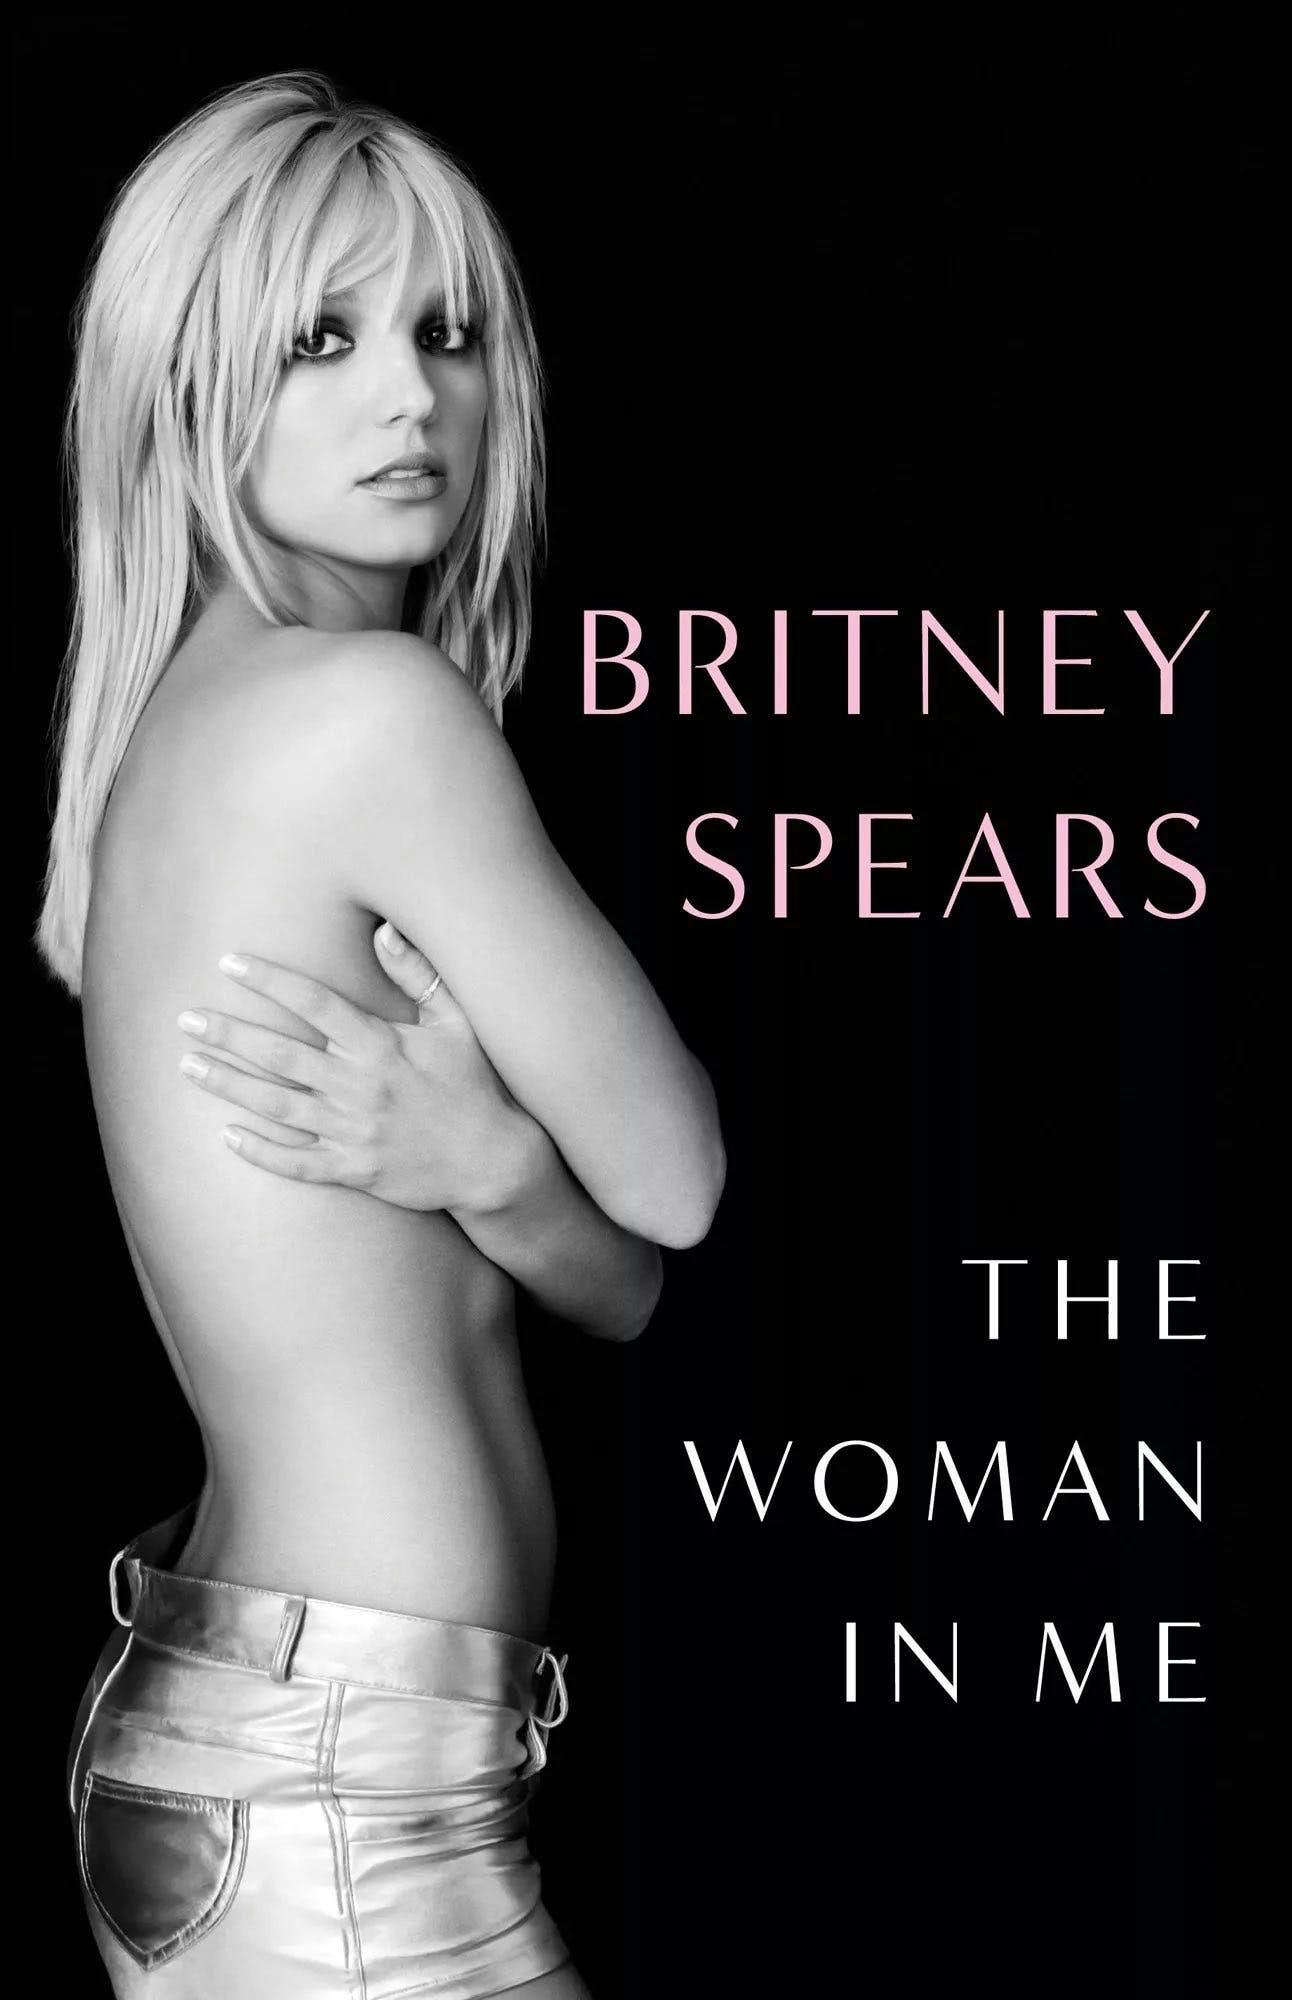 Britney Spears posing topless on cover her celebrity memoir worth the hype